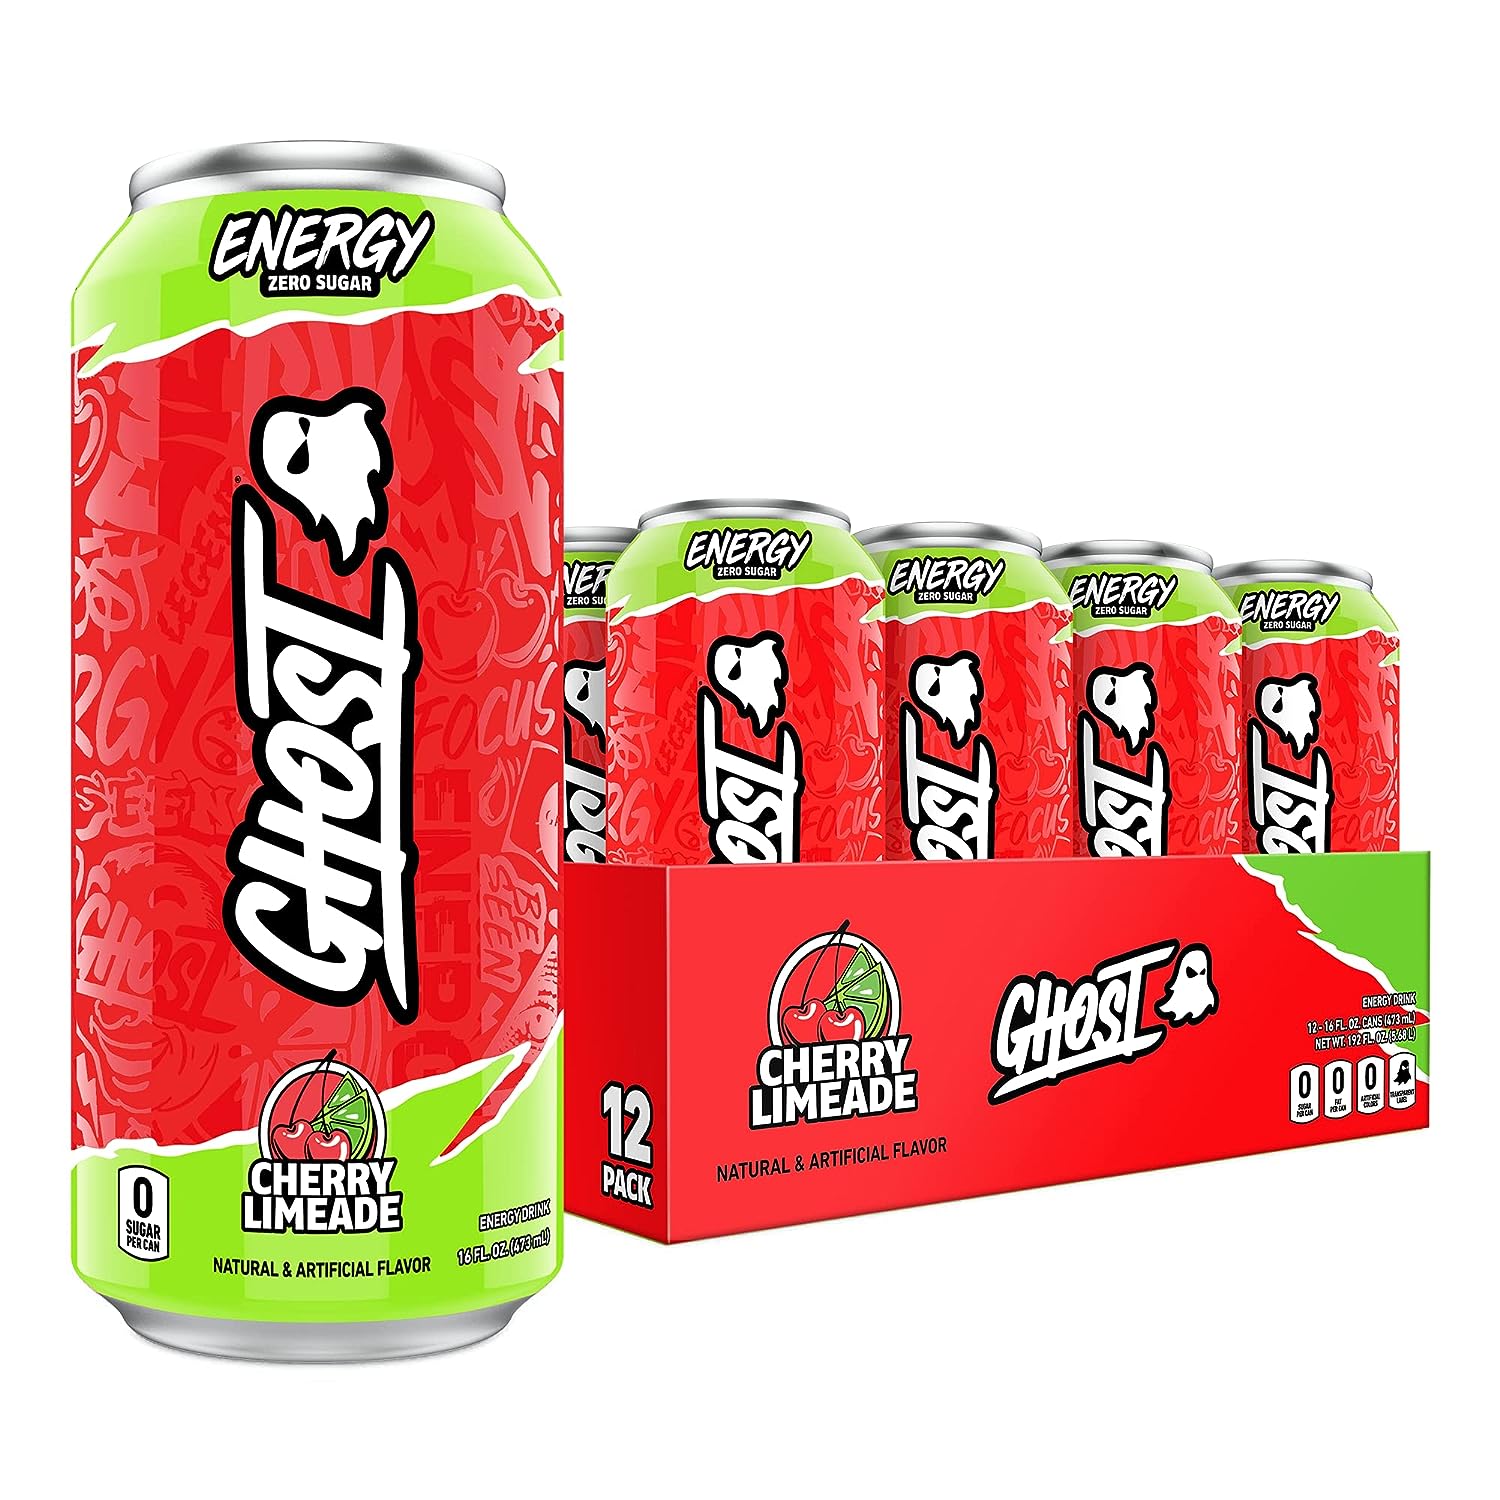 GHOST Energy Drink (1 case of 12 cans) Protein Snacks Cherry Limeade GHOST ghost-energy-drink-1-case-of-12-cans